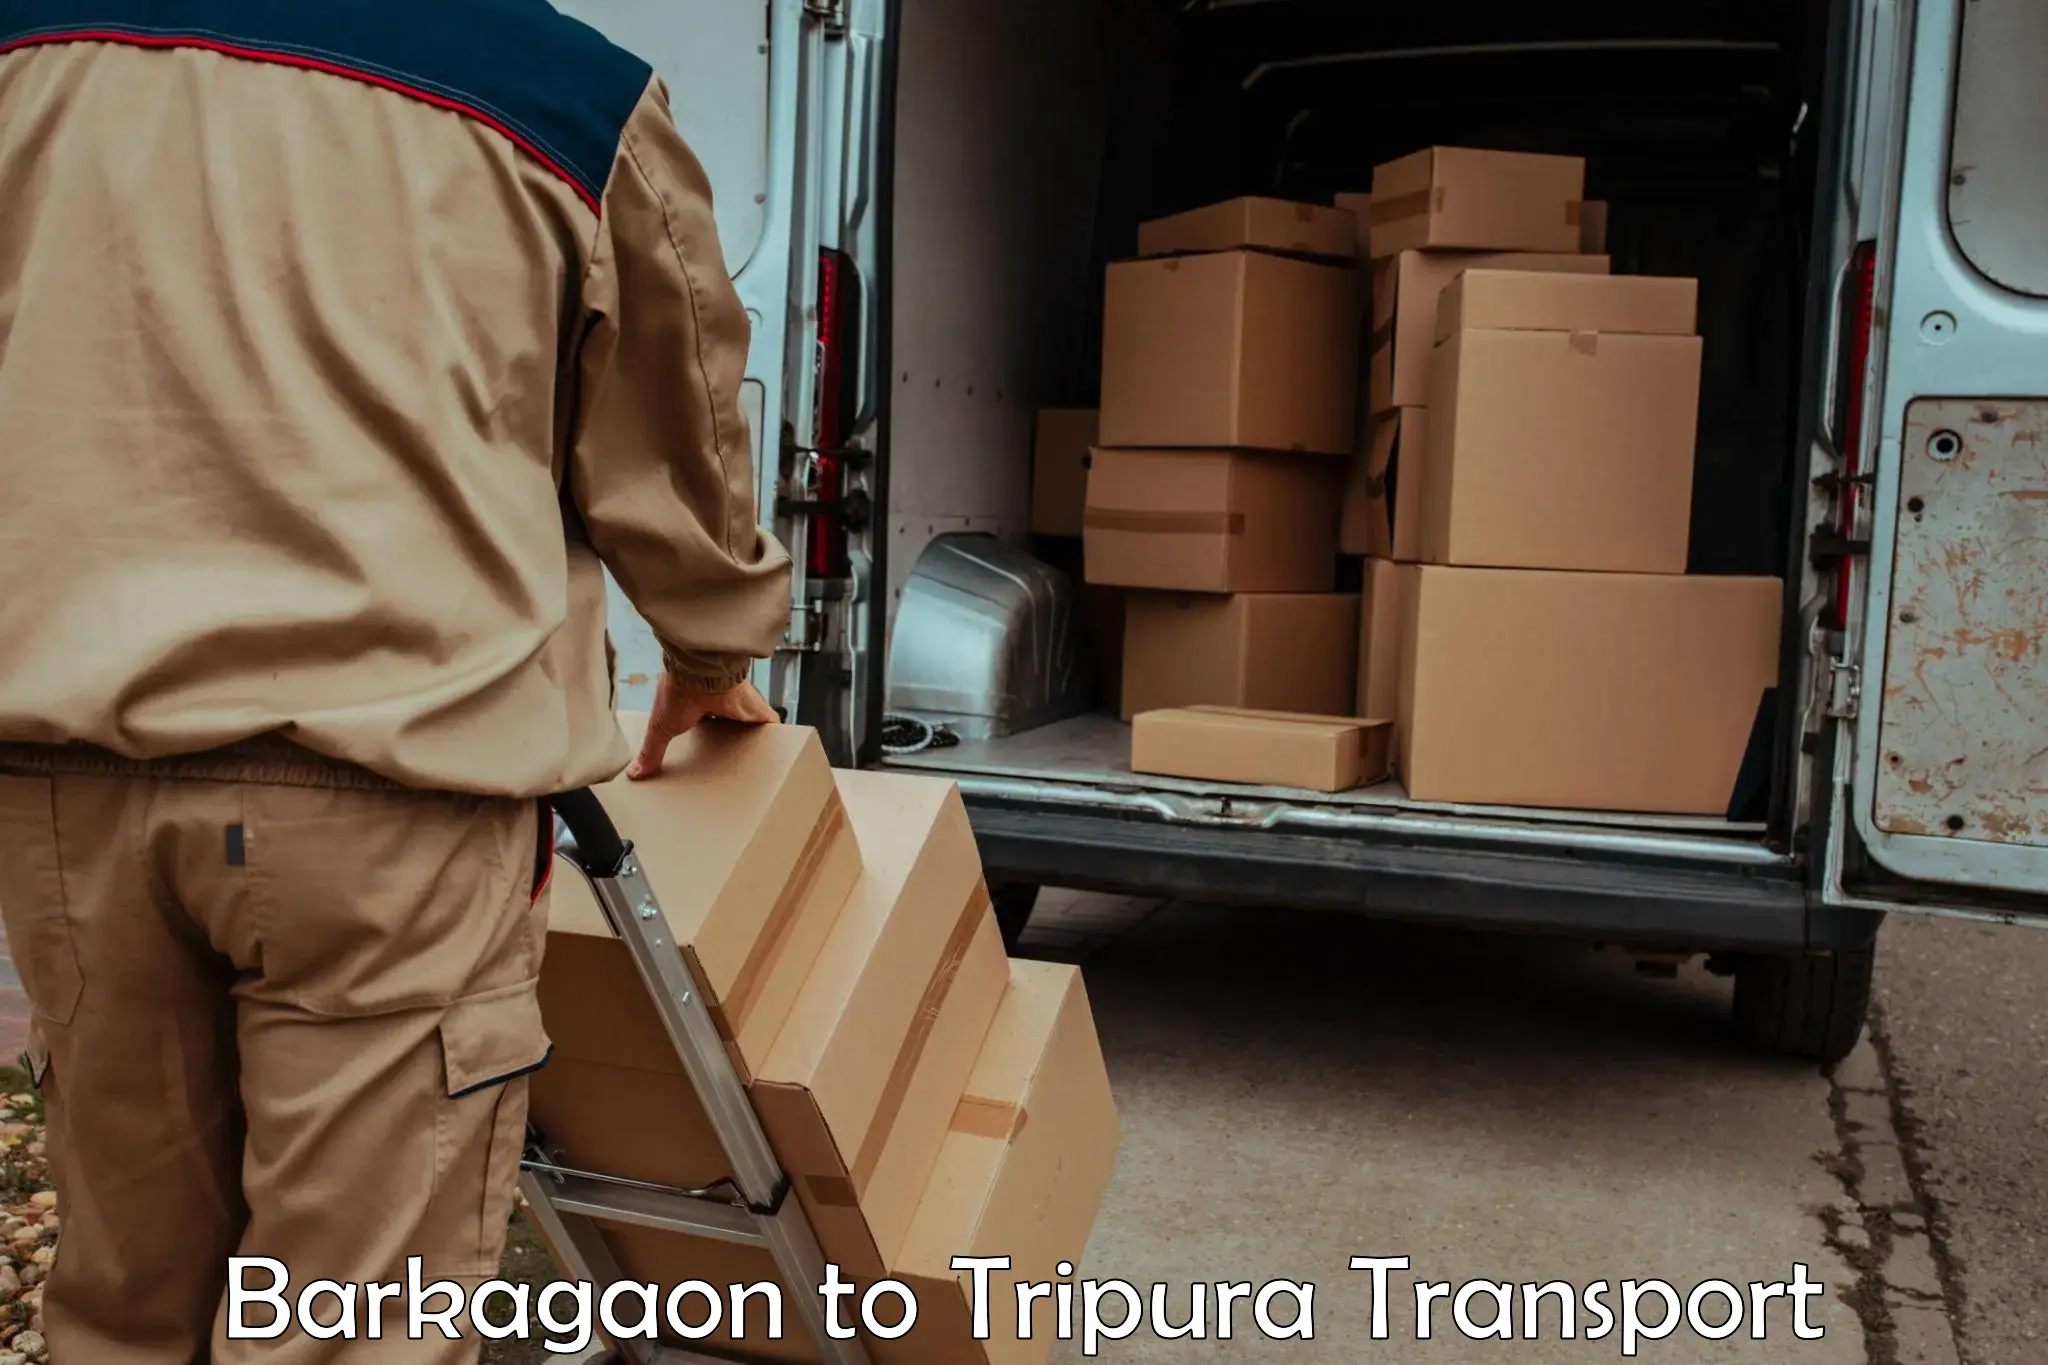 Container transport service Barkagaon to Amarpur